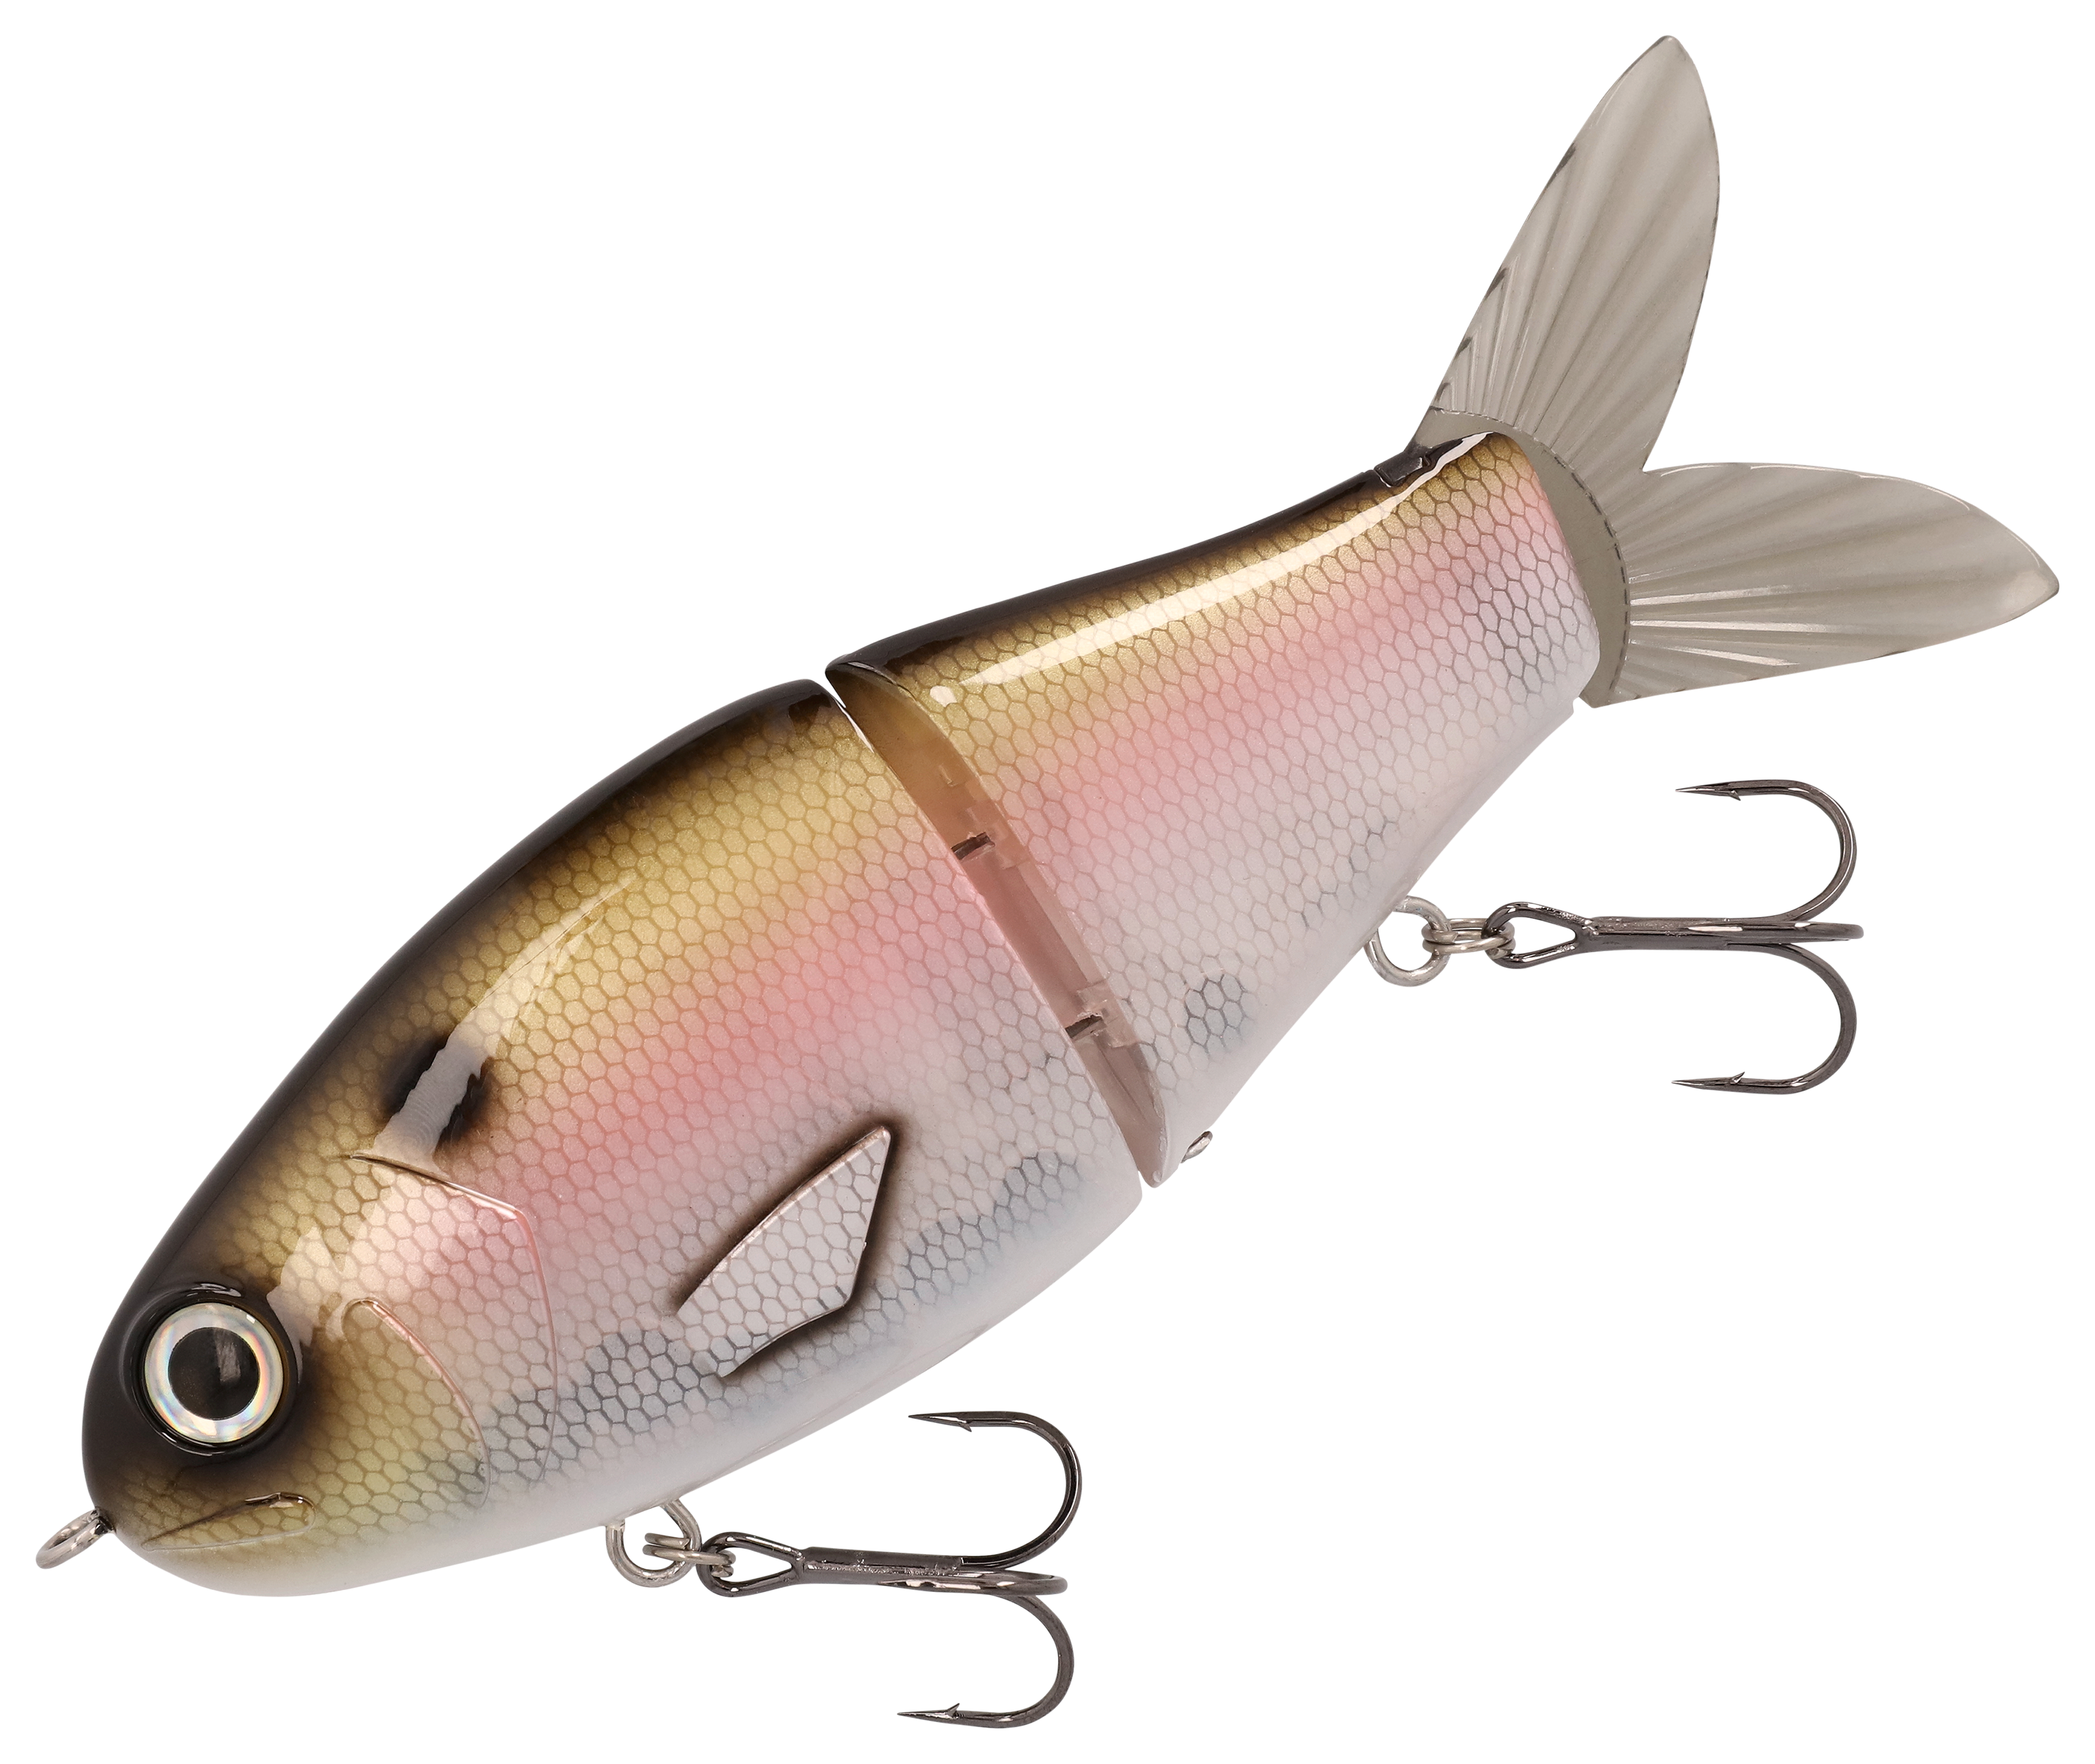 Bass Pro Shops XPS Swerve Glide Swimbait - Clearwater Shad - 6